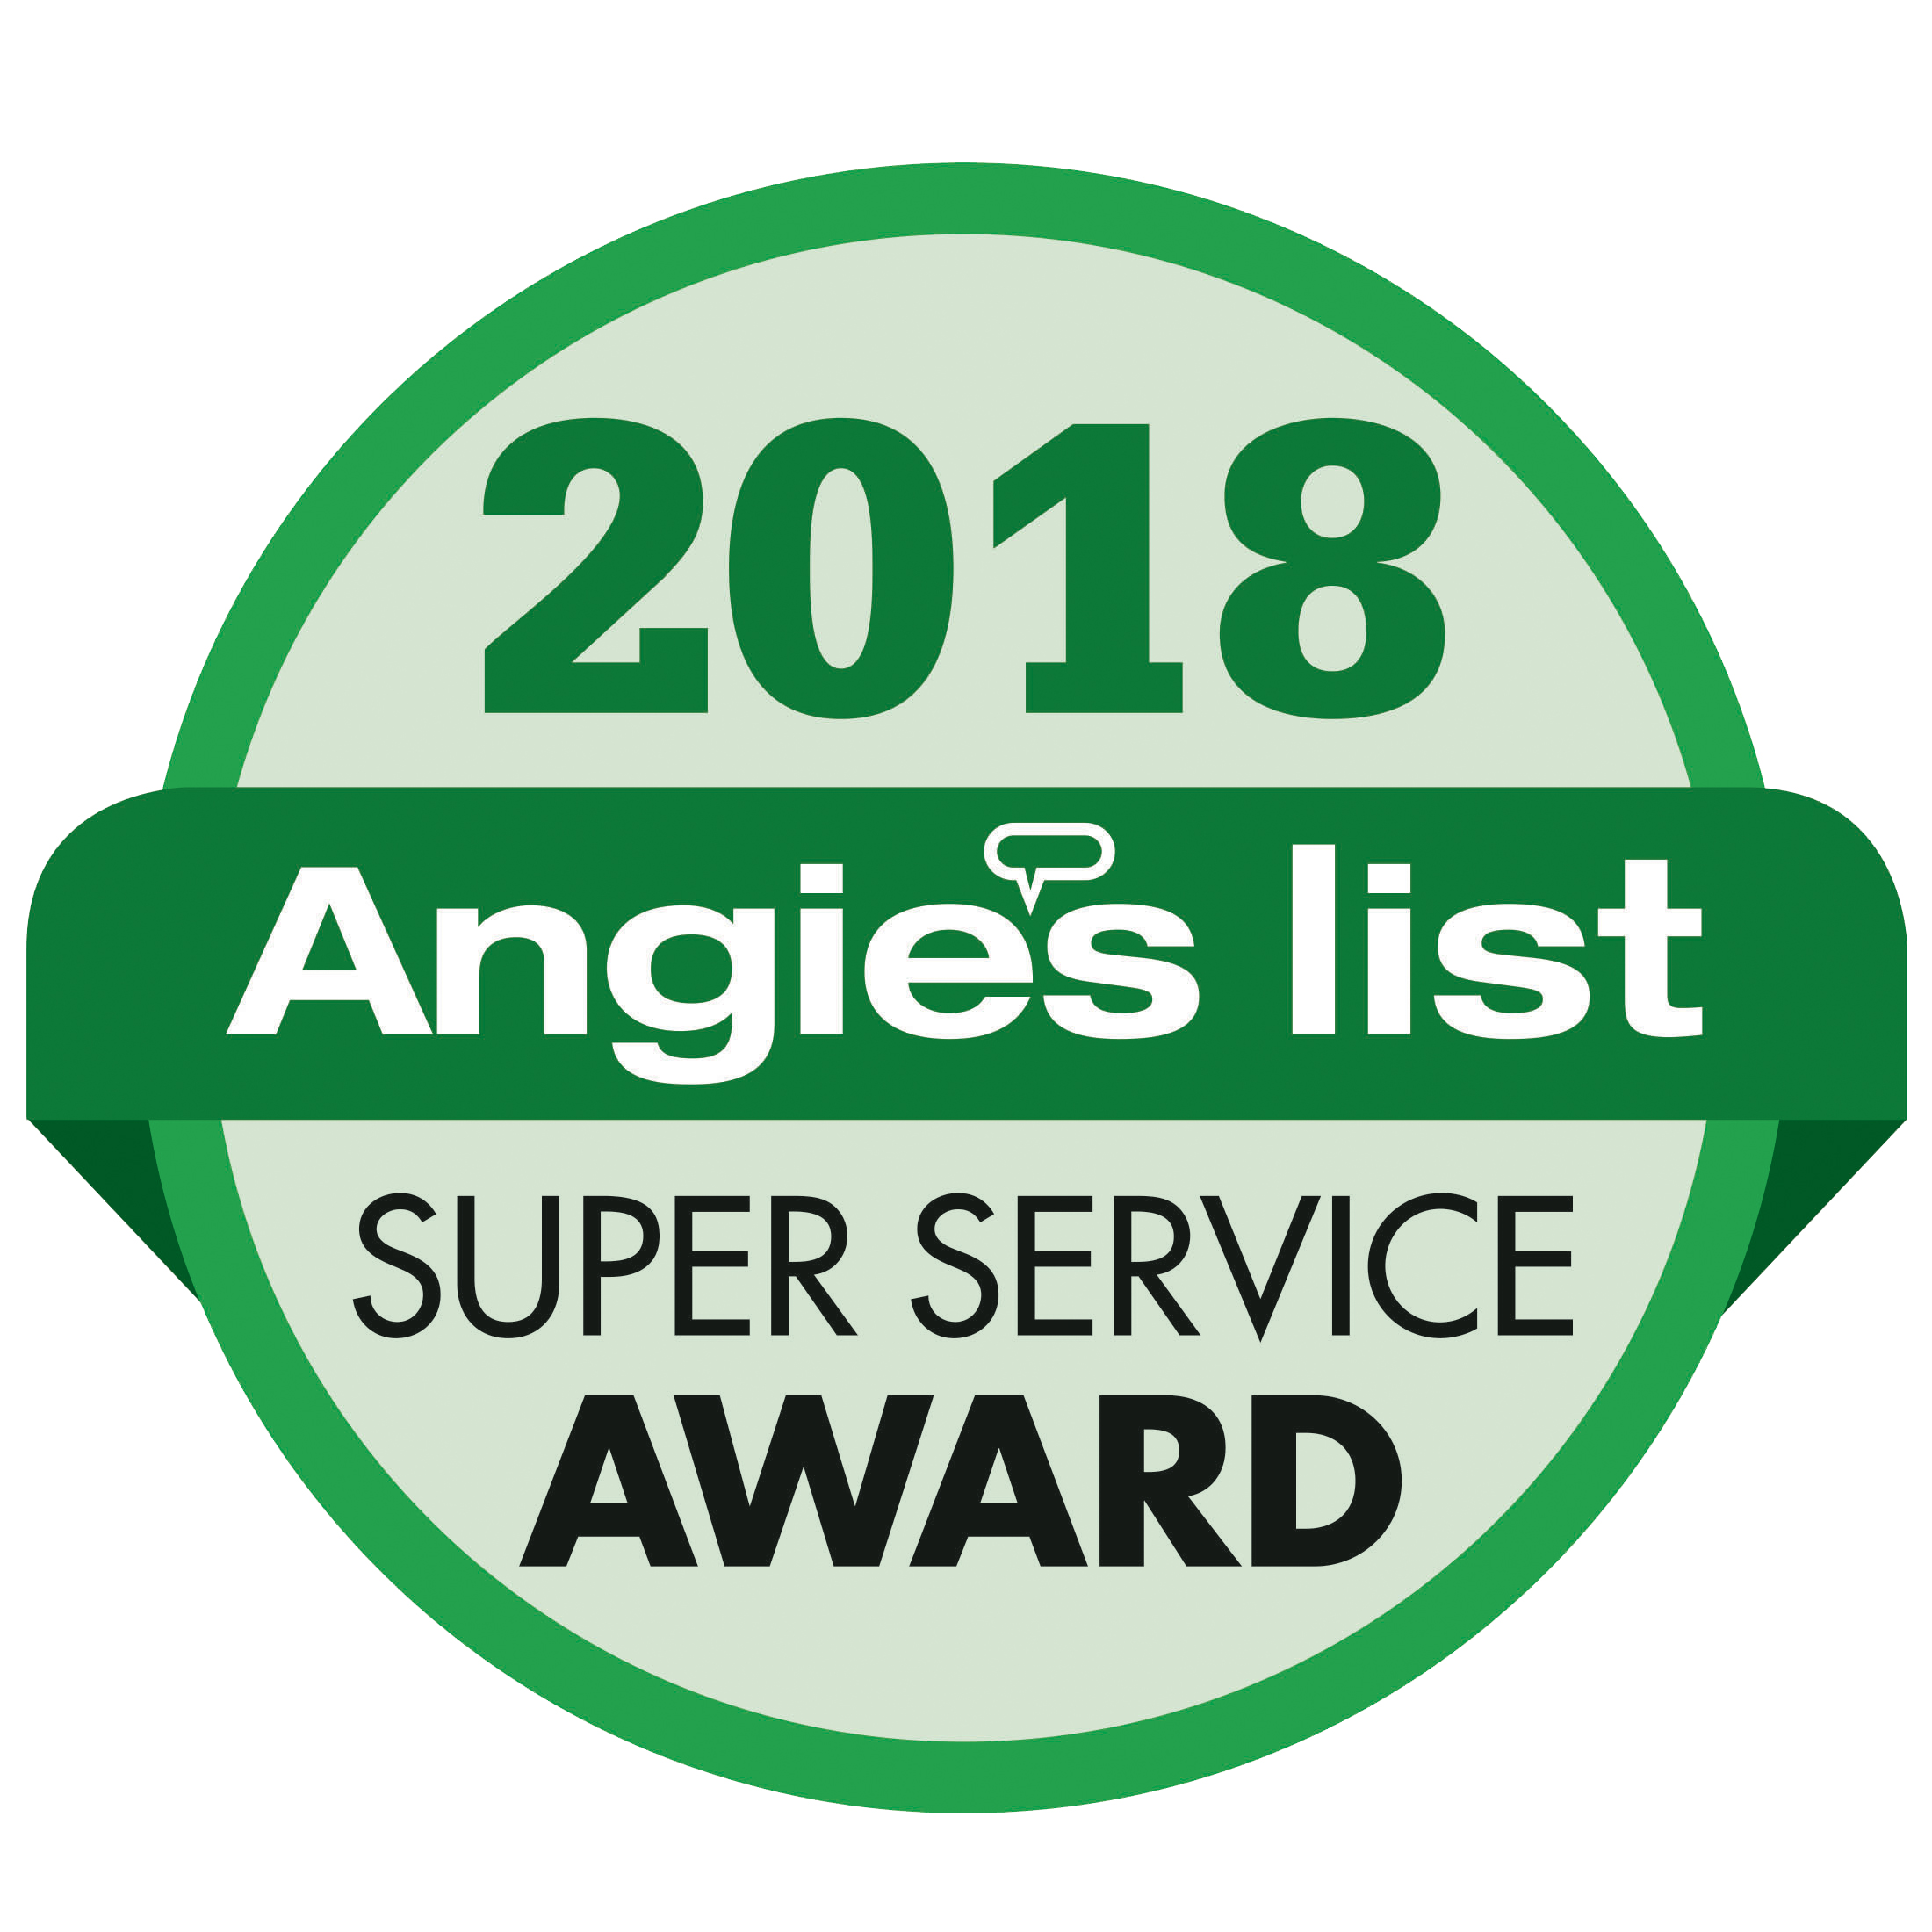 Giroud Tree and Lawn earns the 2018 Super Service Award from Angie’s List